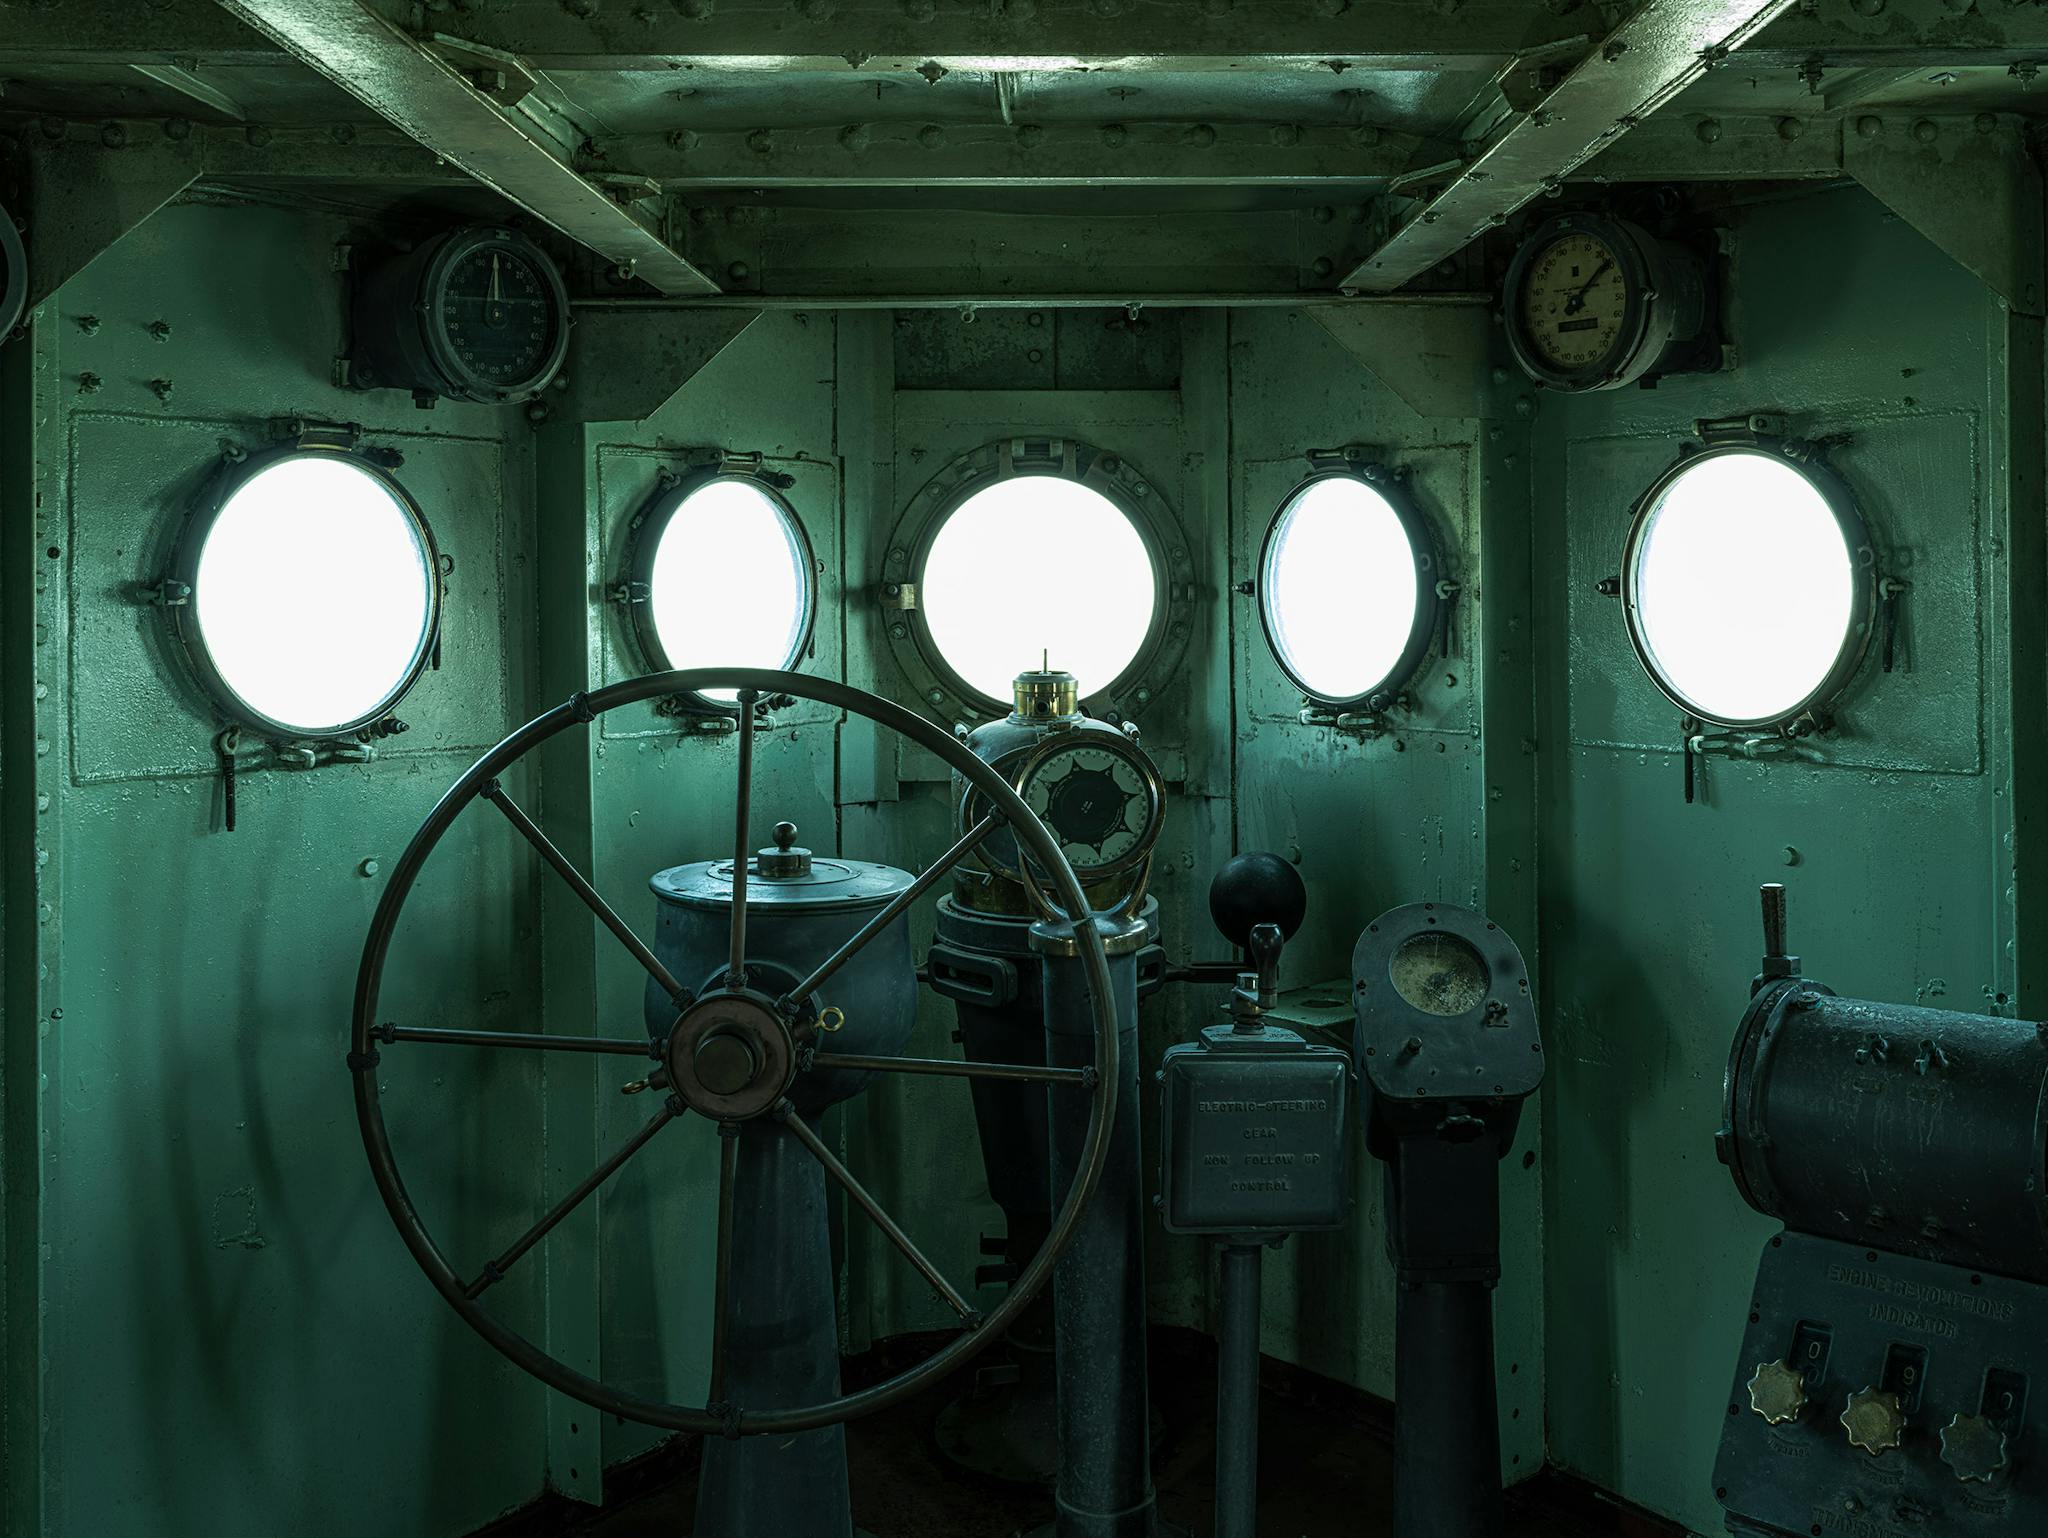 The pilot house, or bridge, where the helmsman turned the steering wheel (a.k.a. the helm) at the direction of the conning officer, who got his orders from the officer on the deck. To the right is the engine-order telegraph, on which orders were signaled to the engine room.